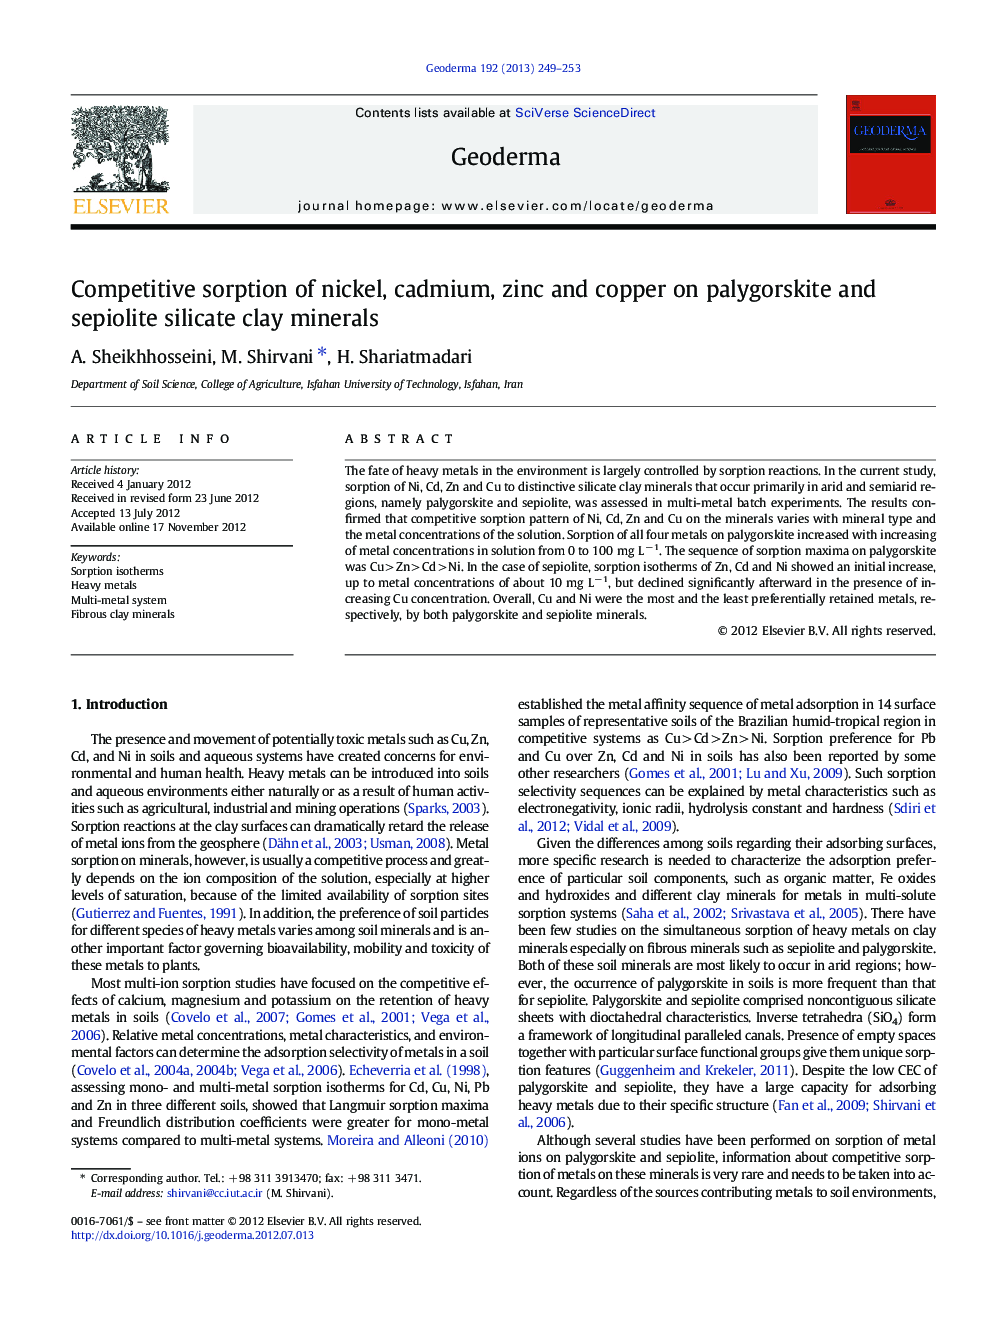 Competitive sorption of nickel, cadmium, zinc and copper on palygorskite and sepiolite silicate clay minerals